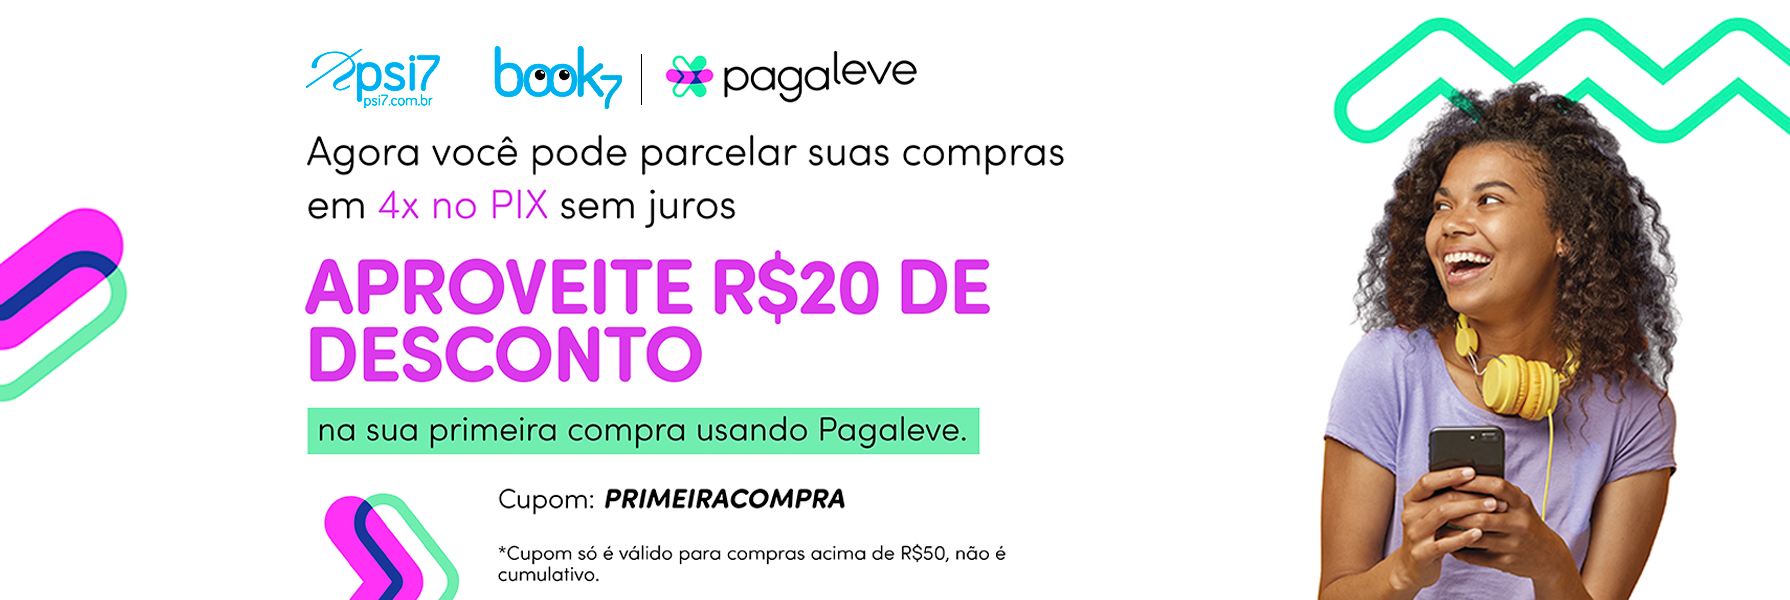 PAGALEVE